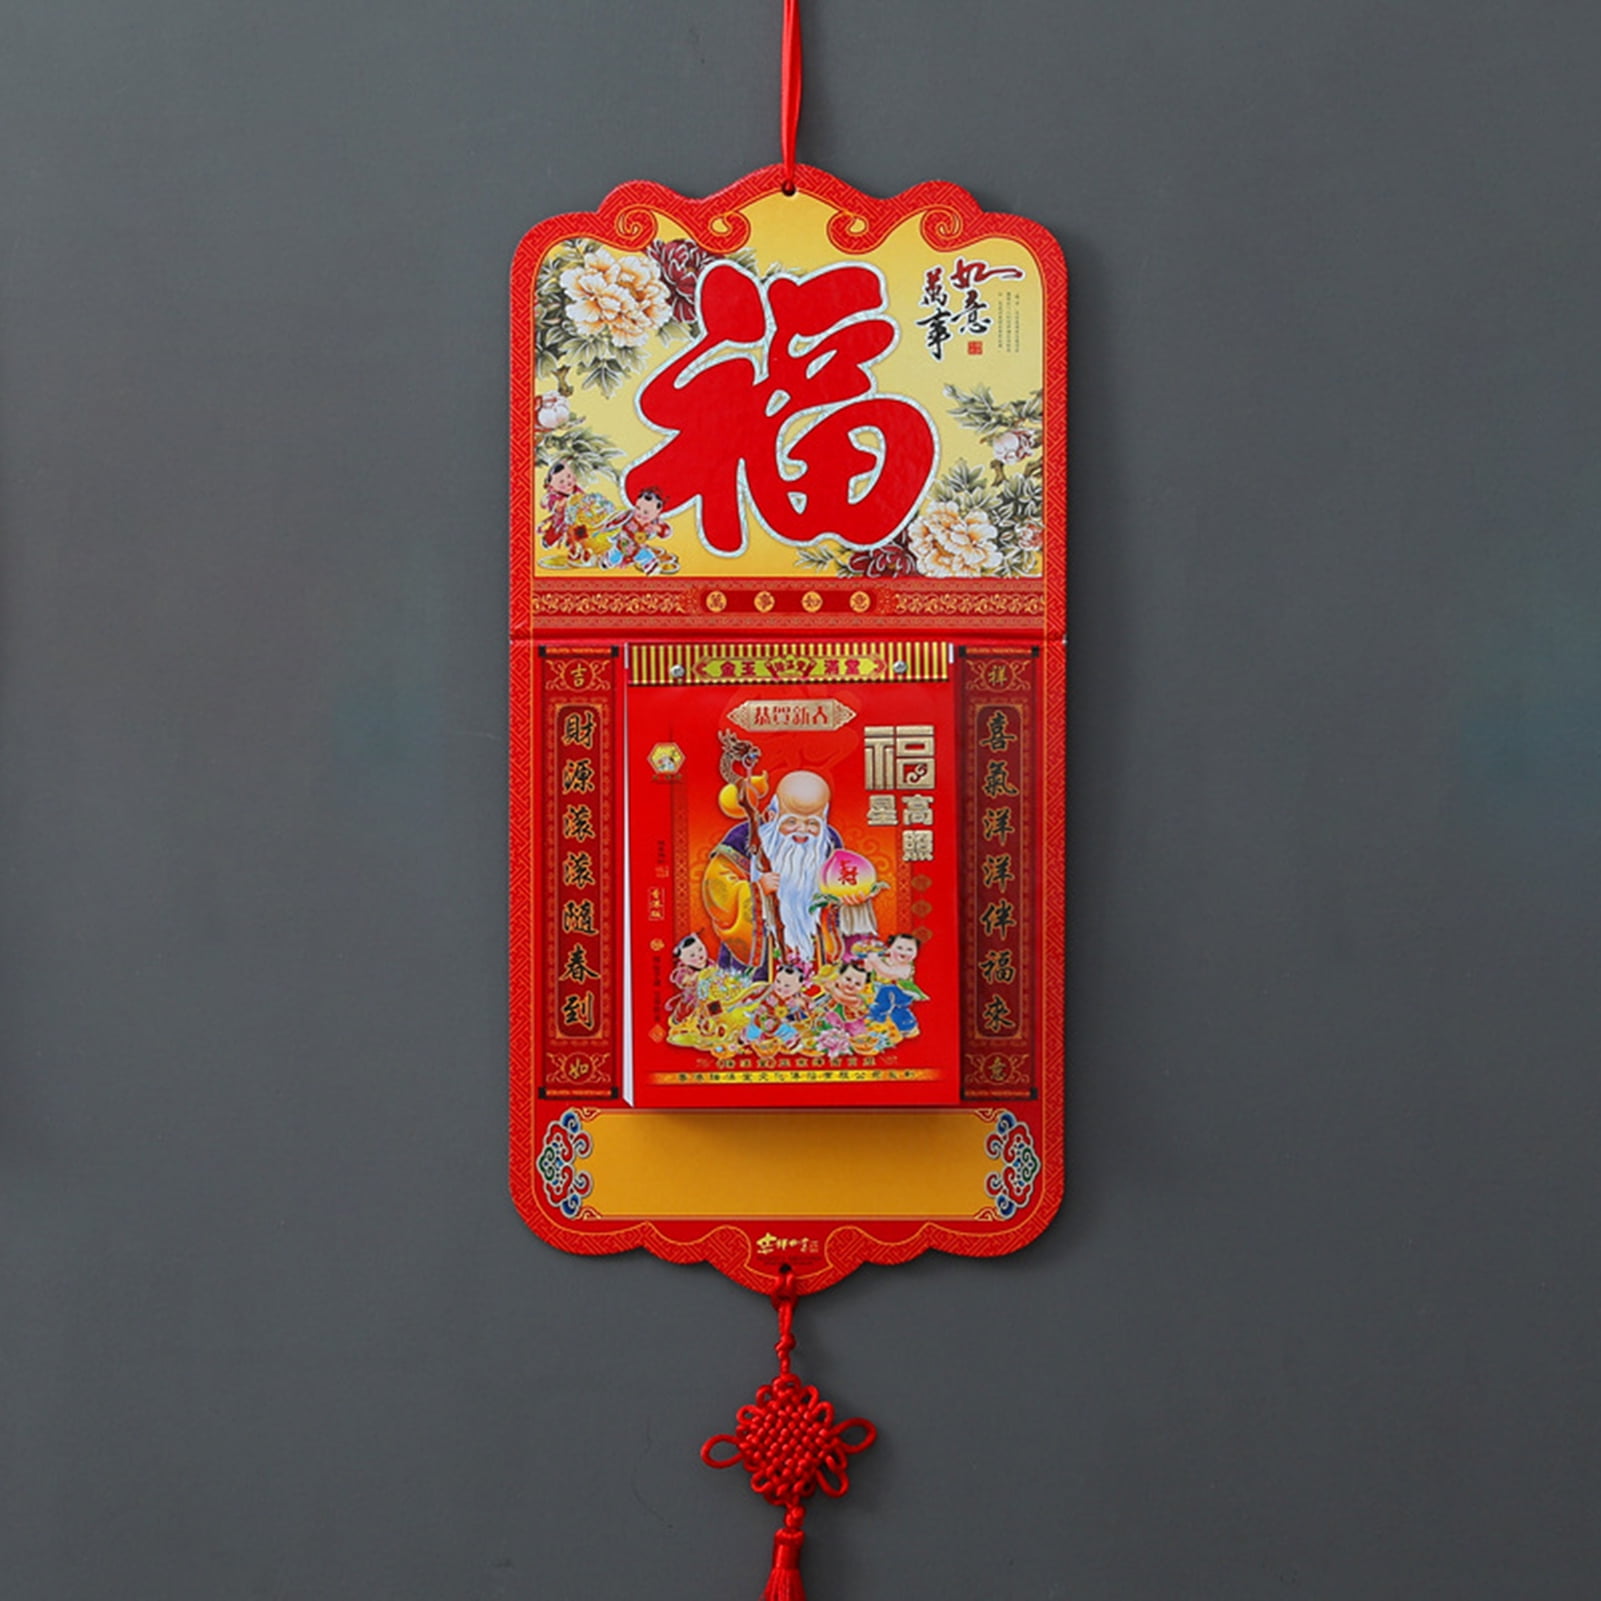 2021 Annual Chinese Calendar Agenda Daily Scheduler Home Office Hanging Decor